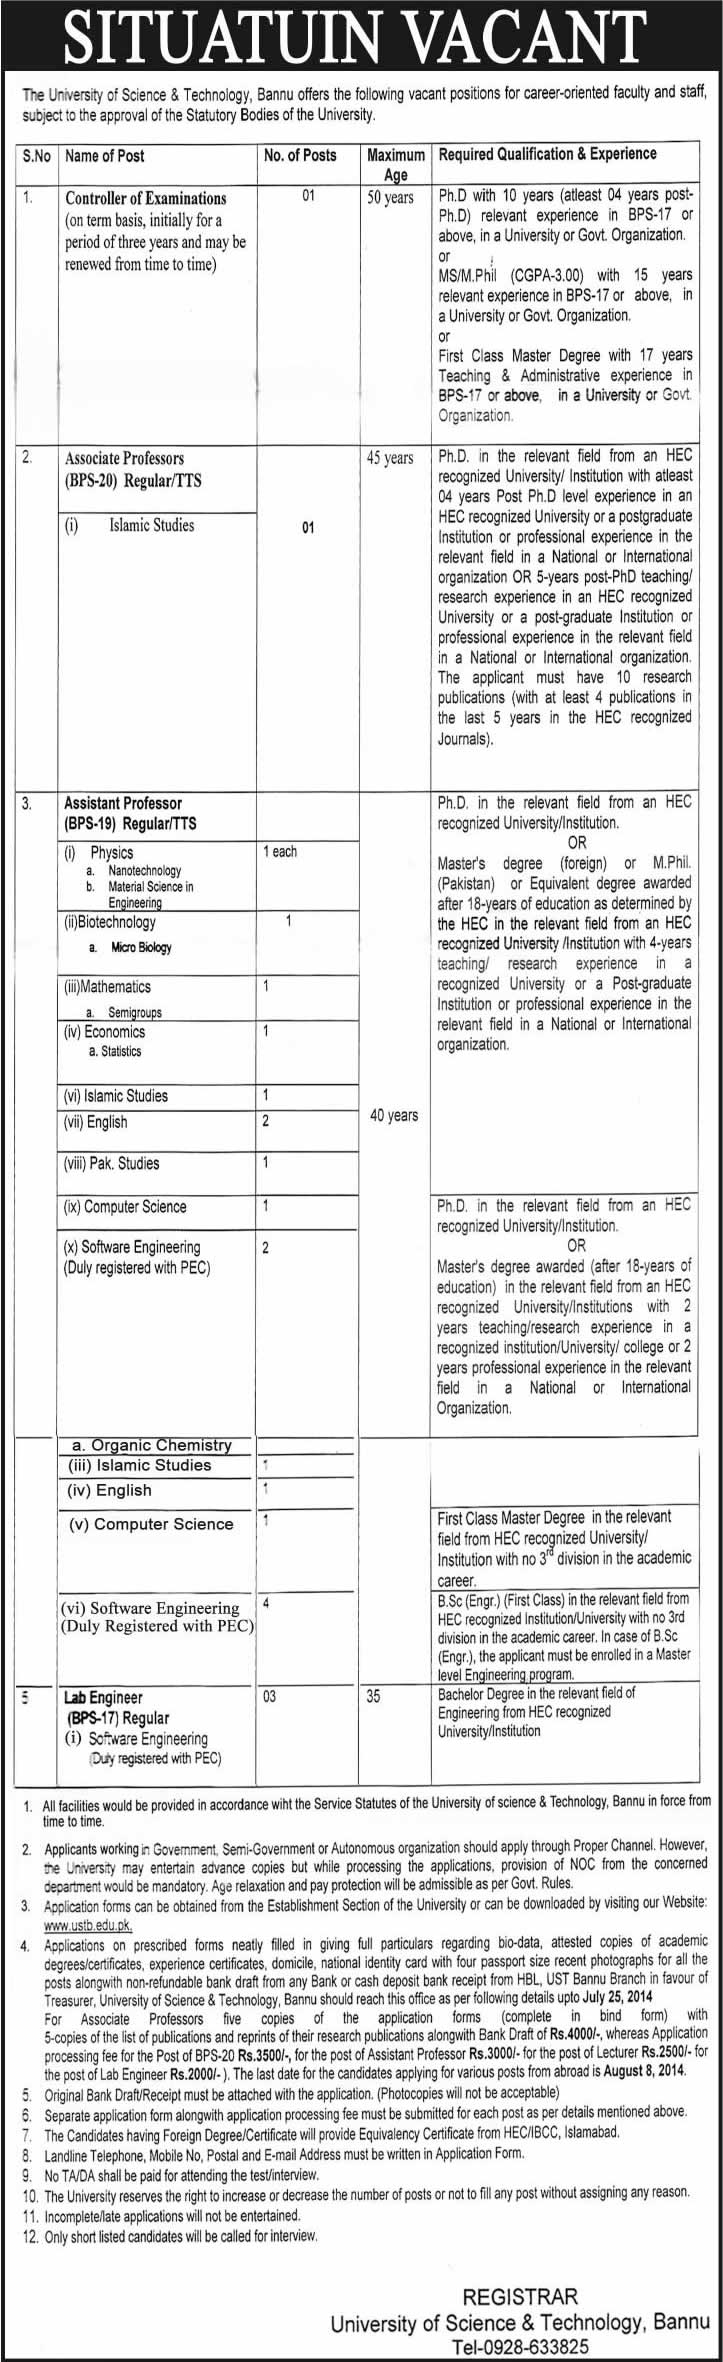 University of Science & Technology Bannu Jobs 2014 July for Teaching Faculty & Admin Staff